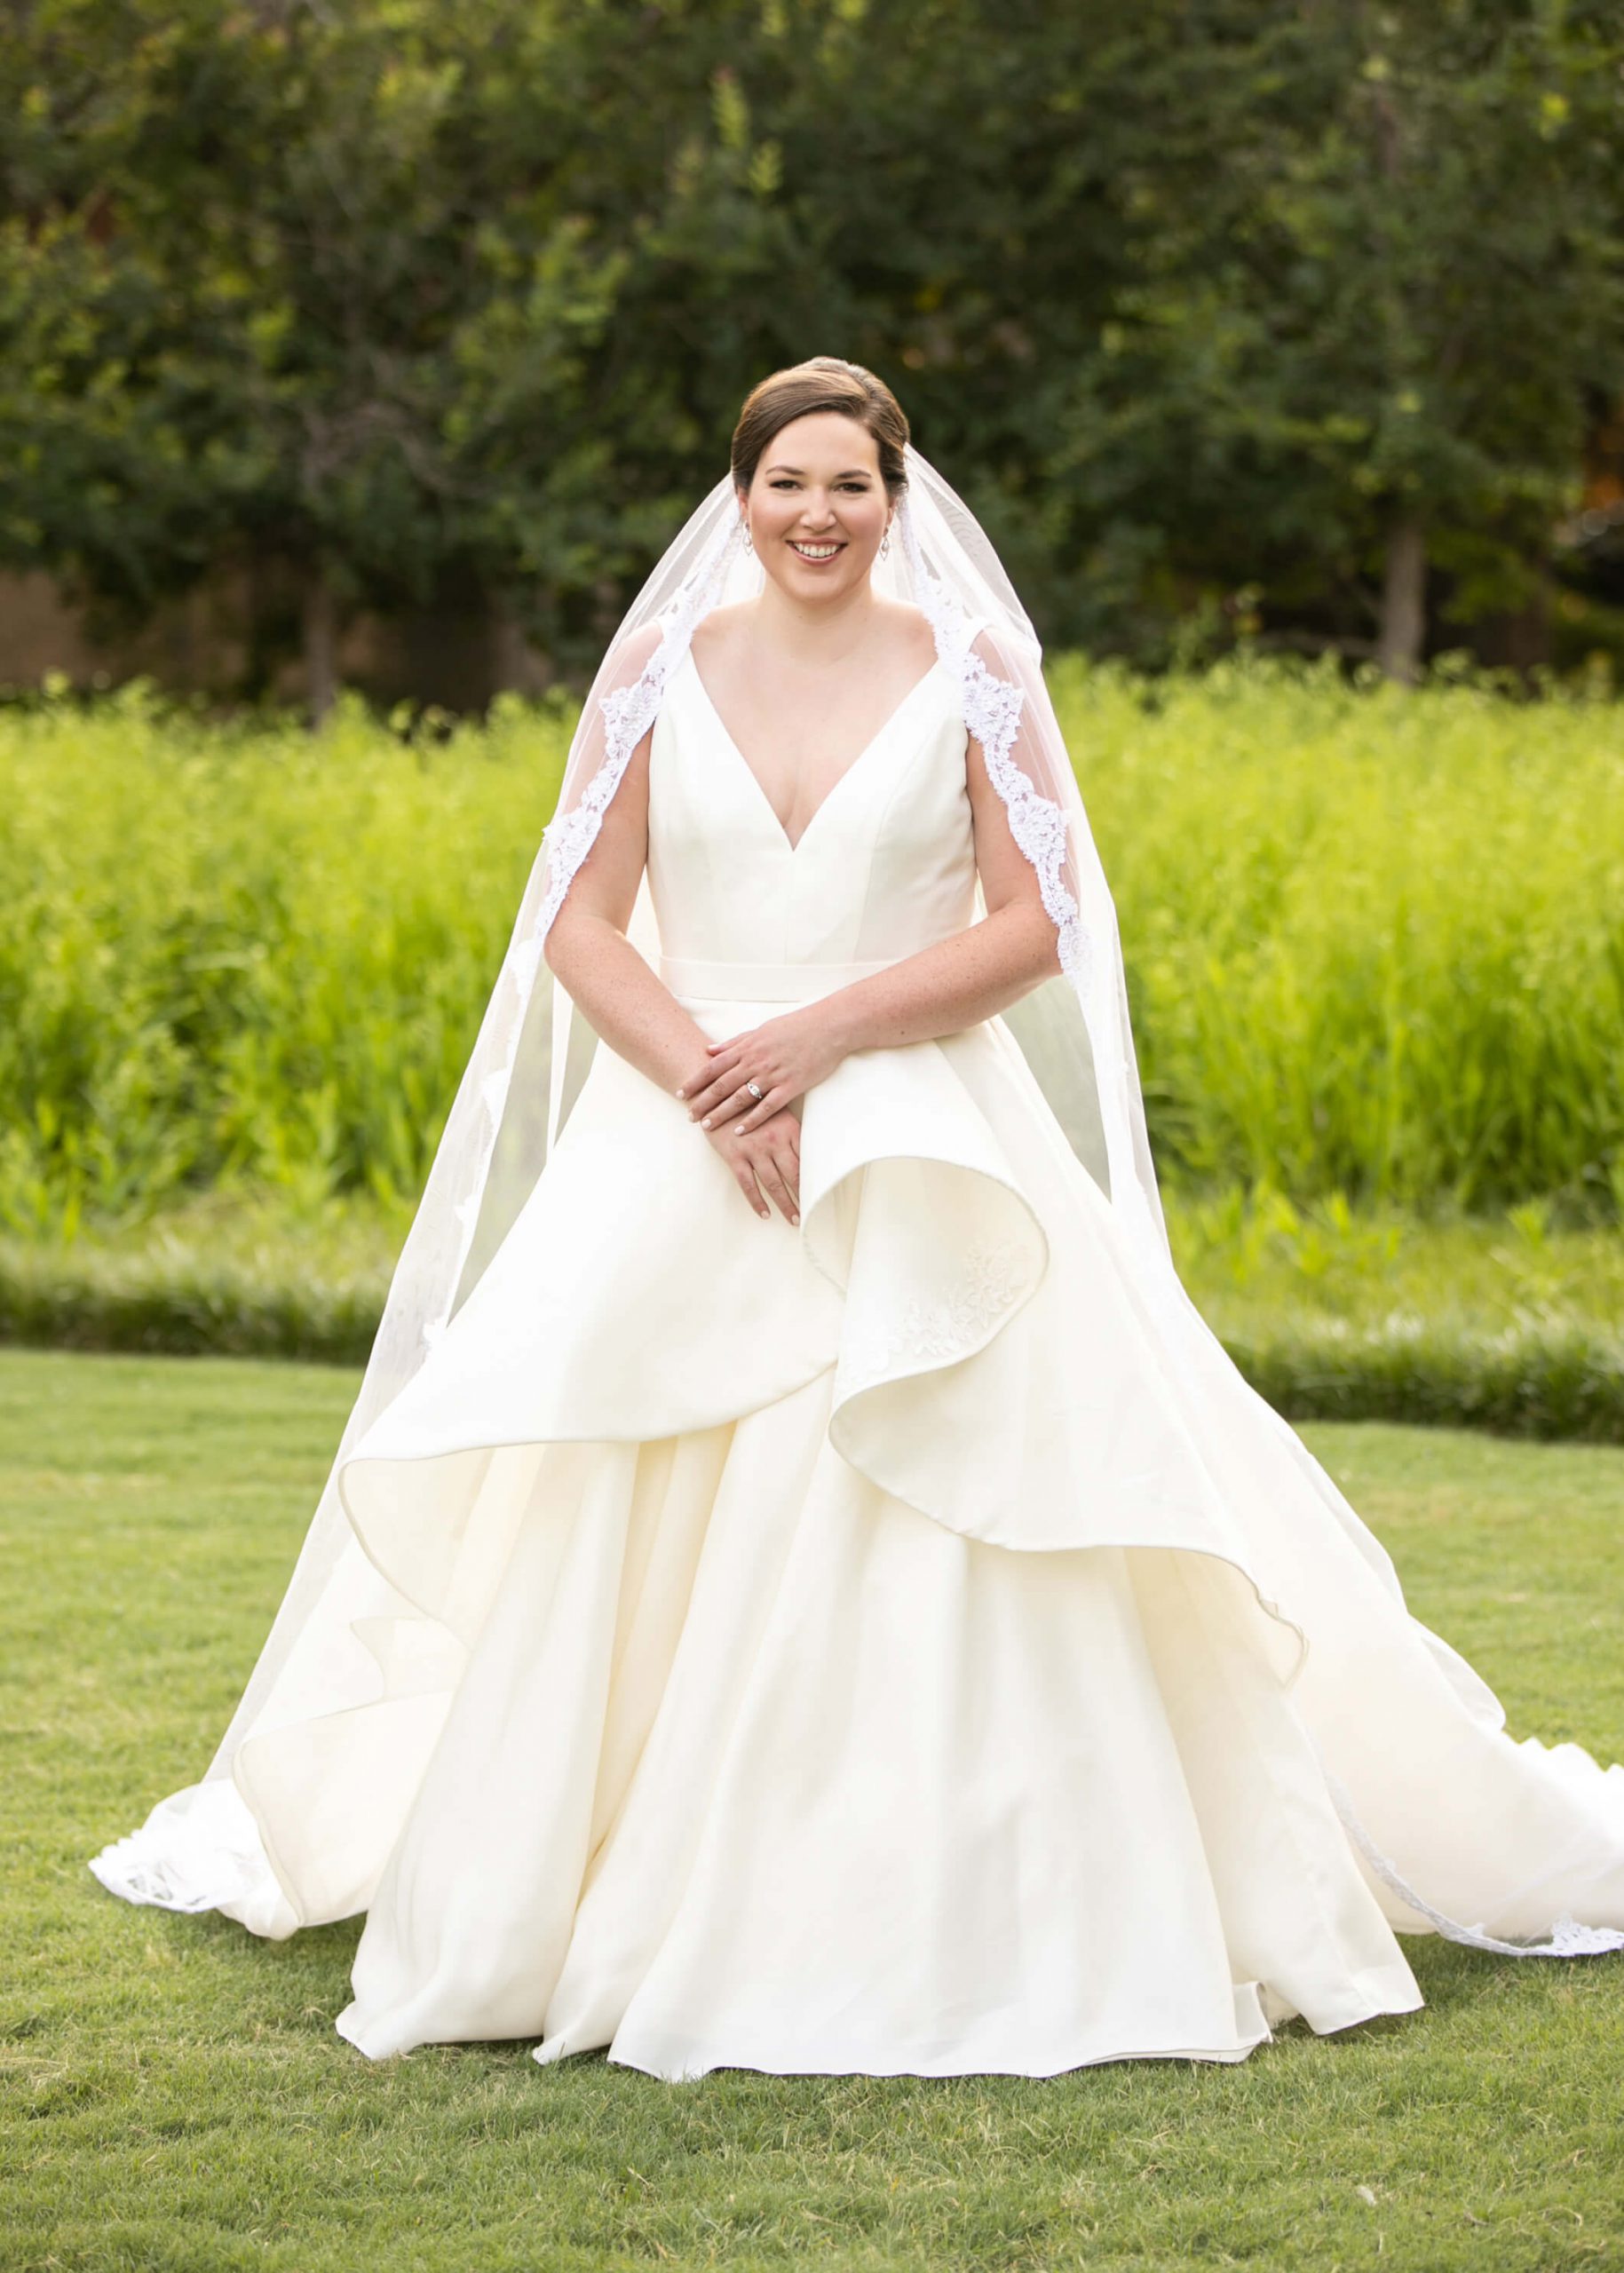 Carole Anne in her bridal gown in a park